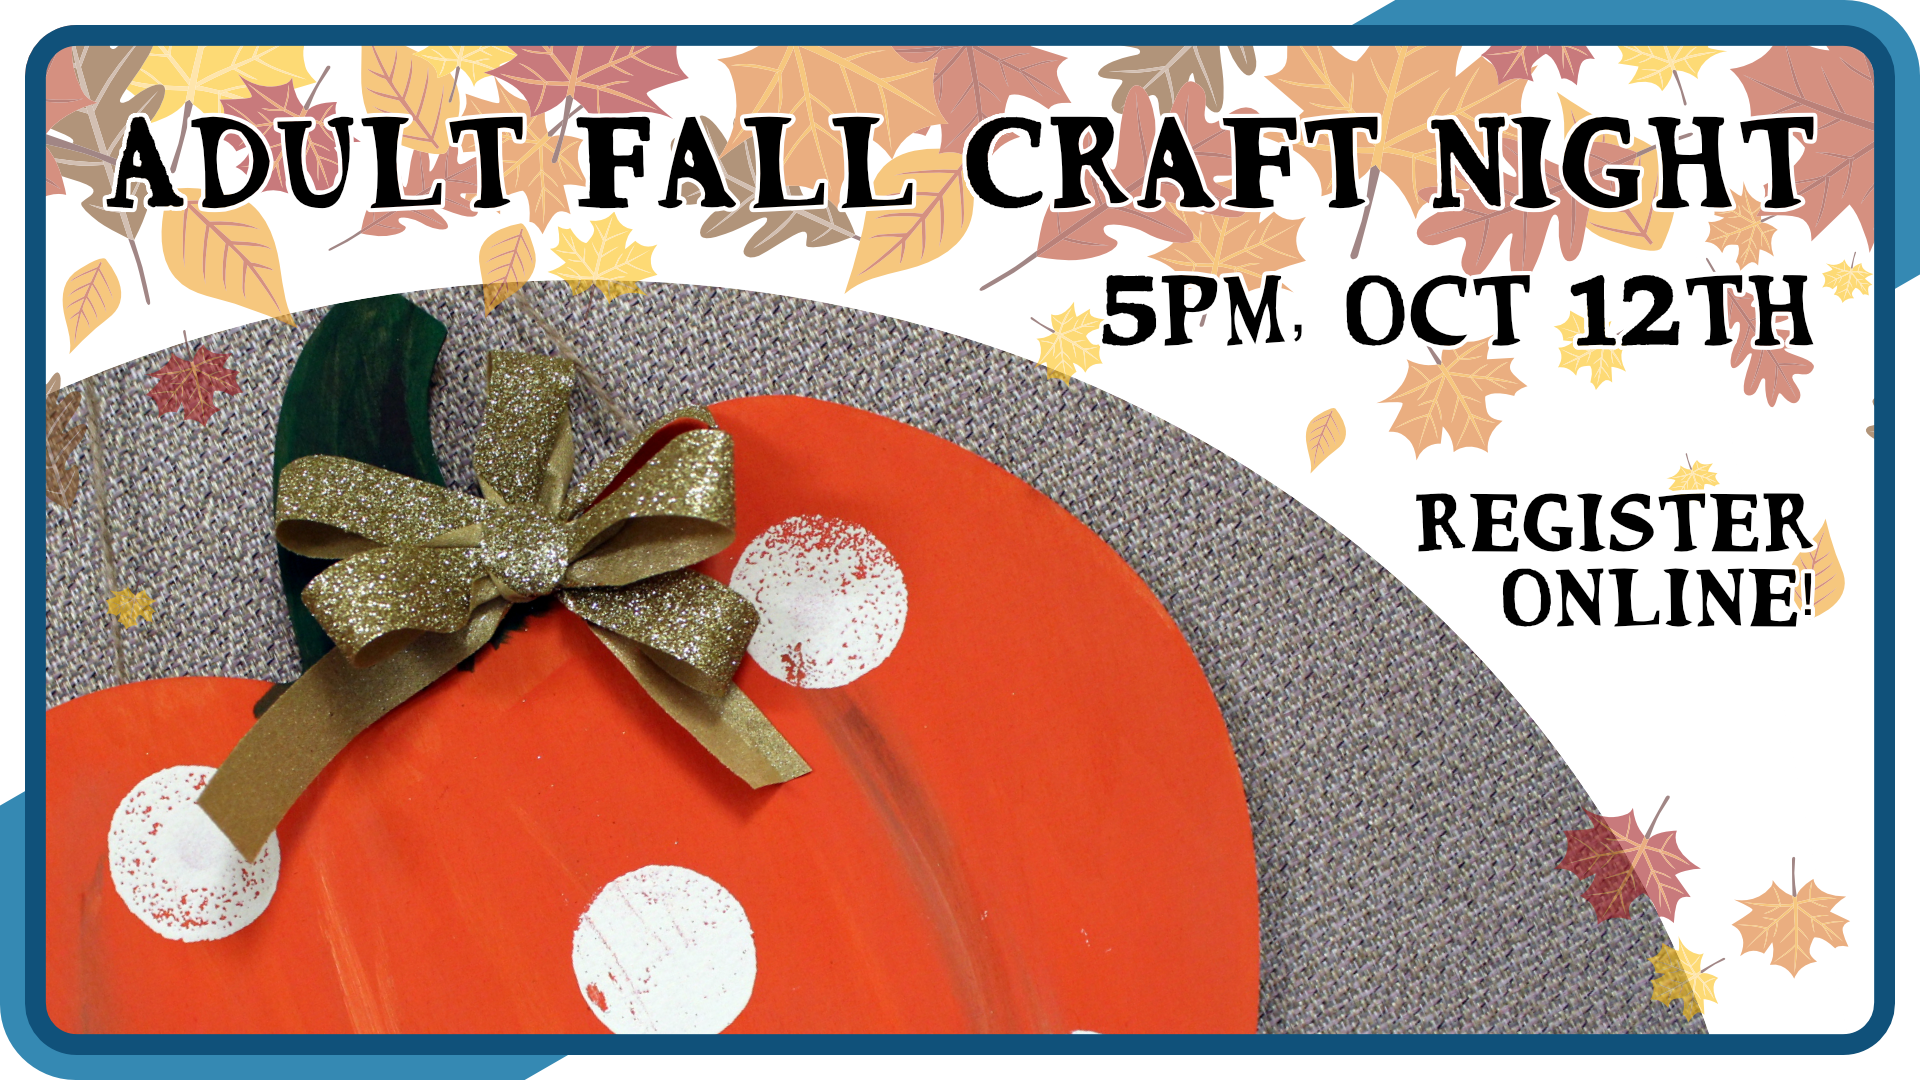 Adult Fall Craft Night, October 12th at 5pm, registration required, for ages 18+